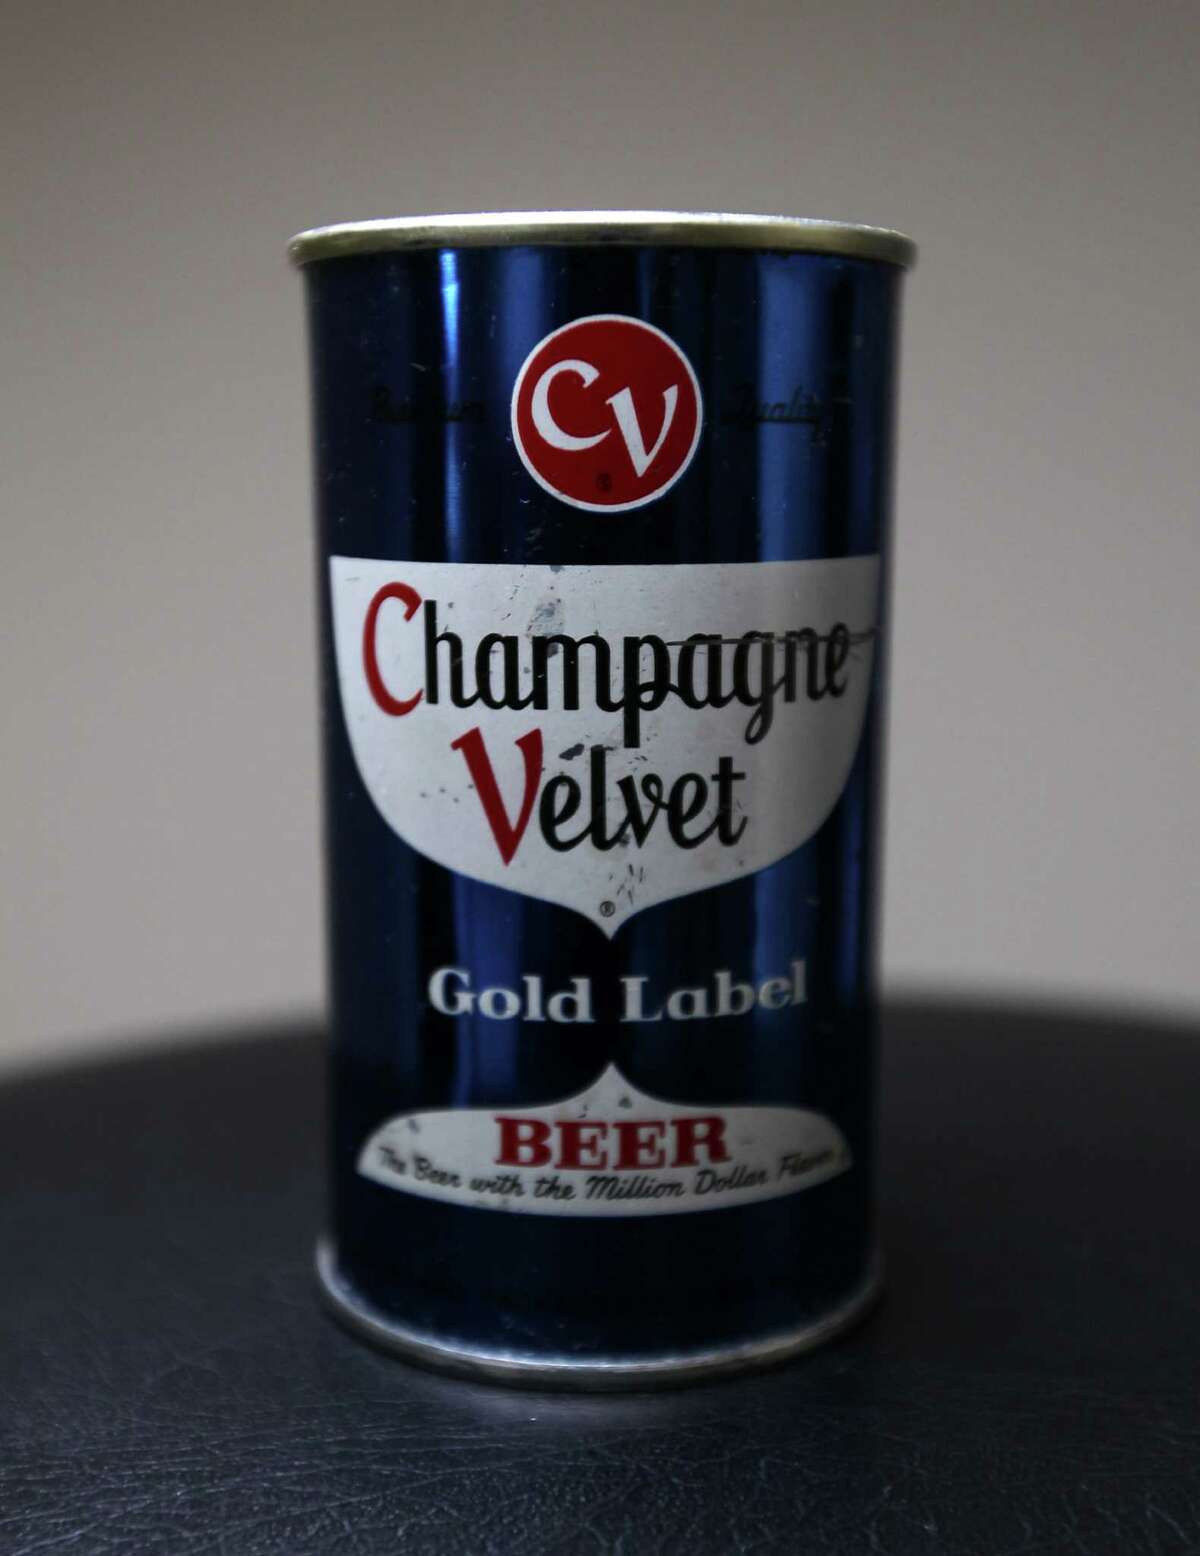 A can of Champagne Velvet beer which is part of Ken Knisely's beer can and beer memorabilia collection Wednesday, Nov. 27, 2013, in Houston. ( James Nielsen / Houston Chronicle )